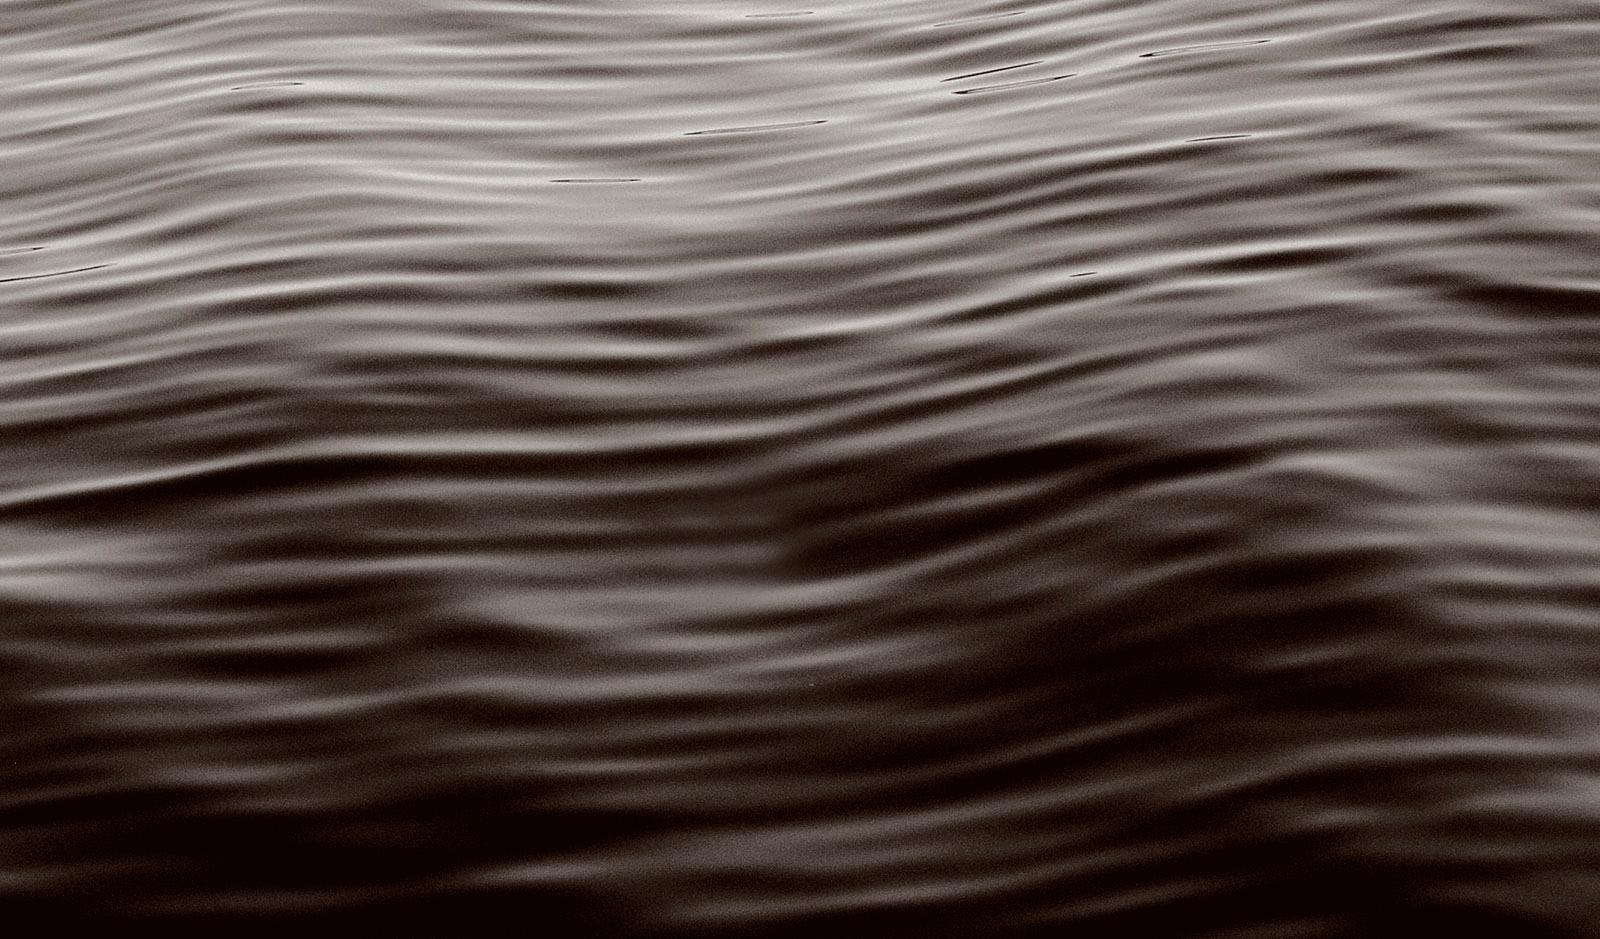 Flowing 1  -  Large scale photograph by Michael Banks 
Archival Pigment print on fiber based paper ( Hahnemühle Photo RAG Baryta 315 gsm )

Limited Editions of 5  , signed + numbered by artist, with certificate of authenticity 

Archival pigment